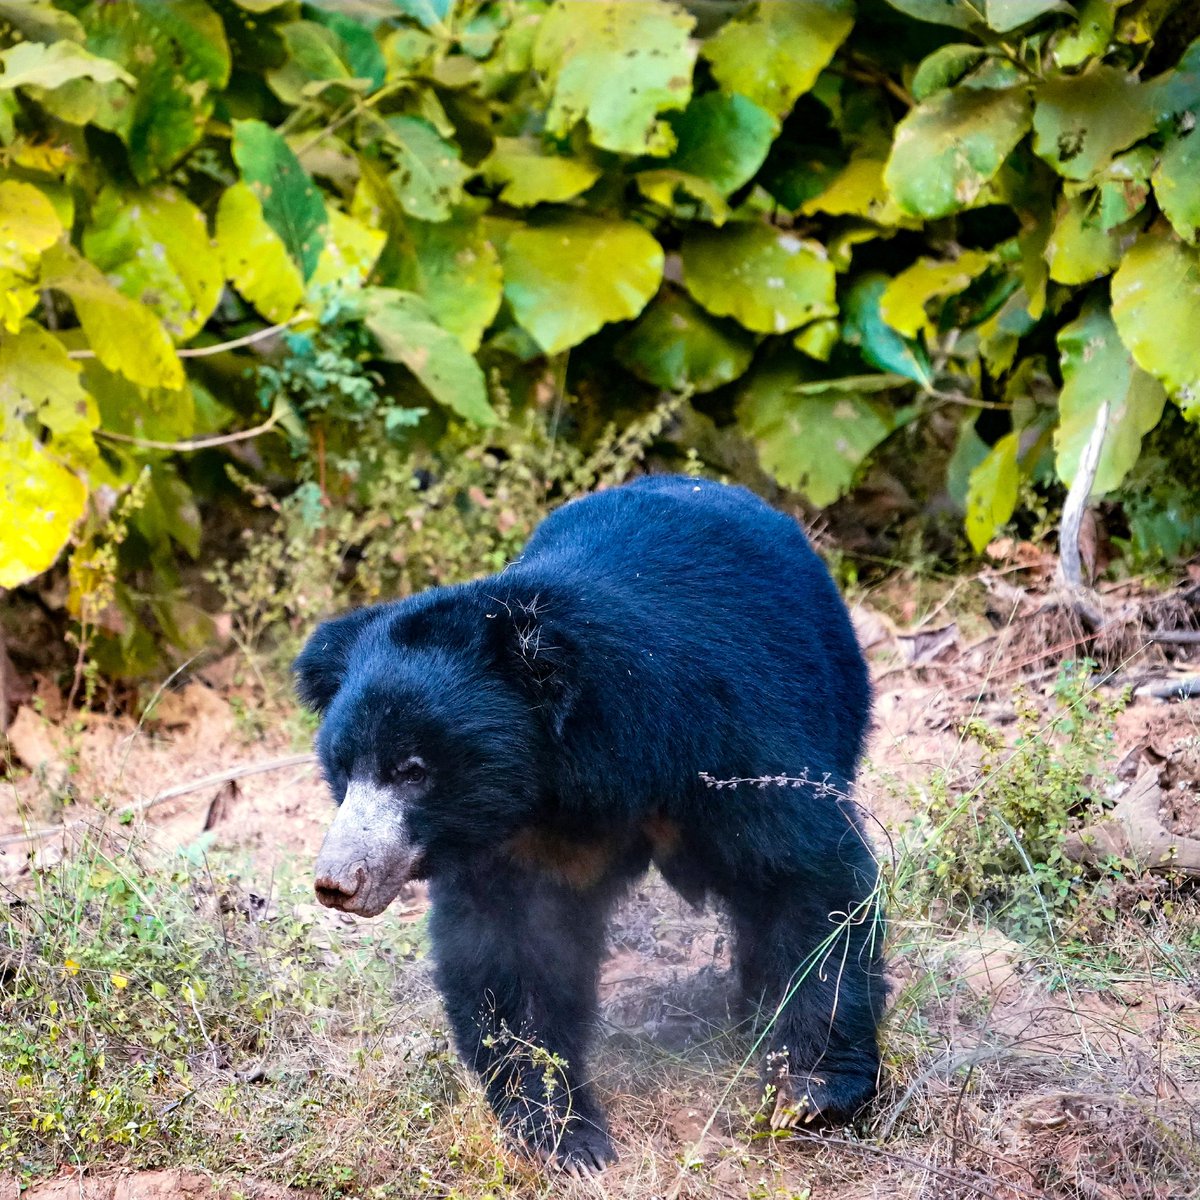 Sloth bears remind us of the beauty and diversity of nature. Let's protect them and preserve the wonders of our planet. 🌎🐻 #NaturePreservation #Conservationmatters #protectslothbears 
#wildlife #wildlifephotography